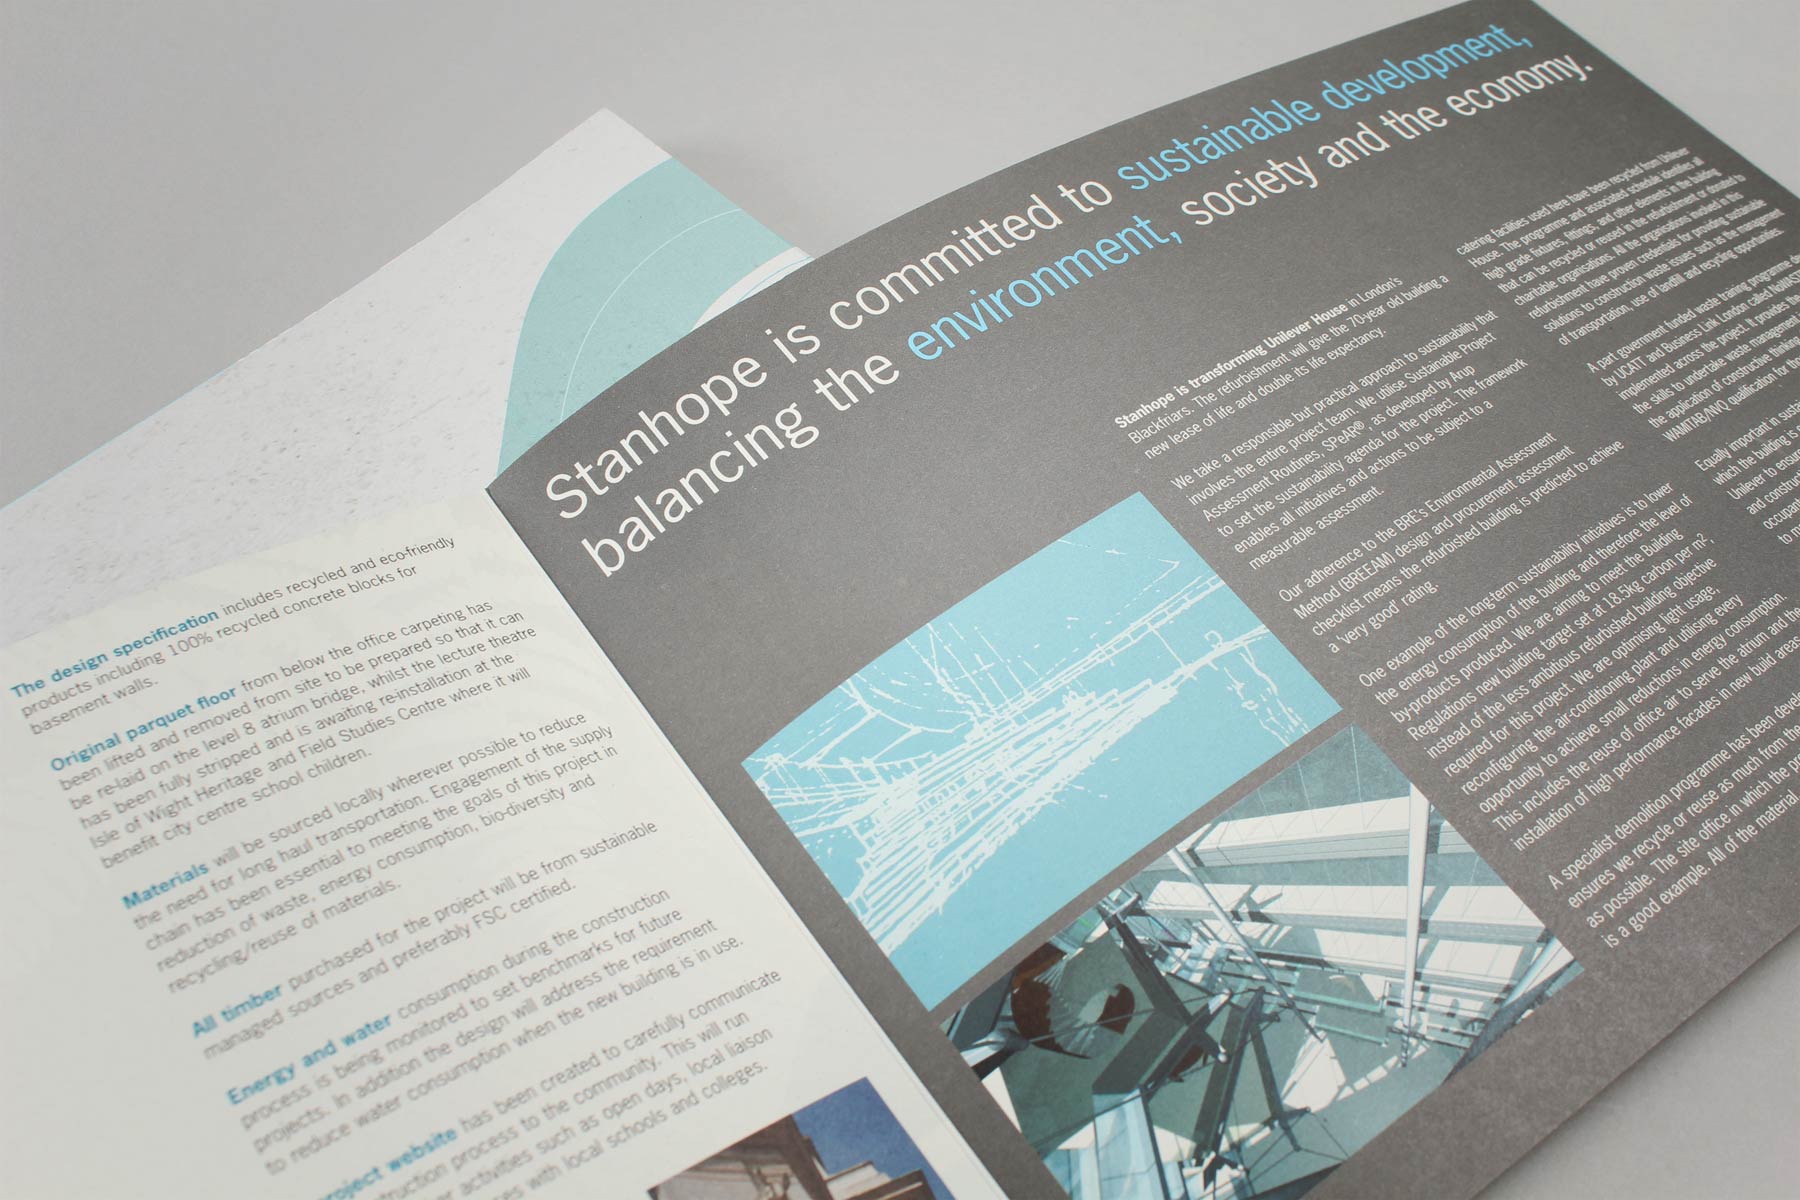 The communication featured information and diagrams conveying the Stanhope vision of building a future-fit, sustainable HQ for Unilever.